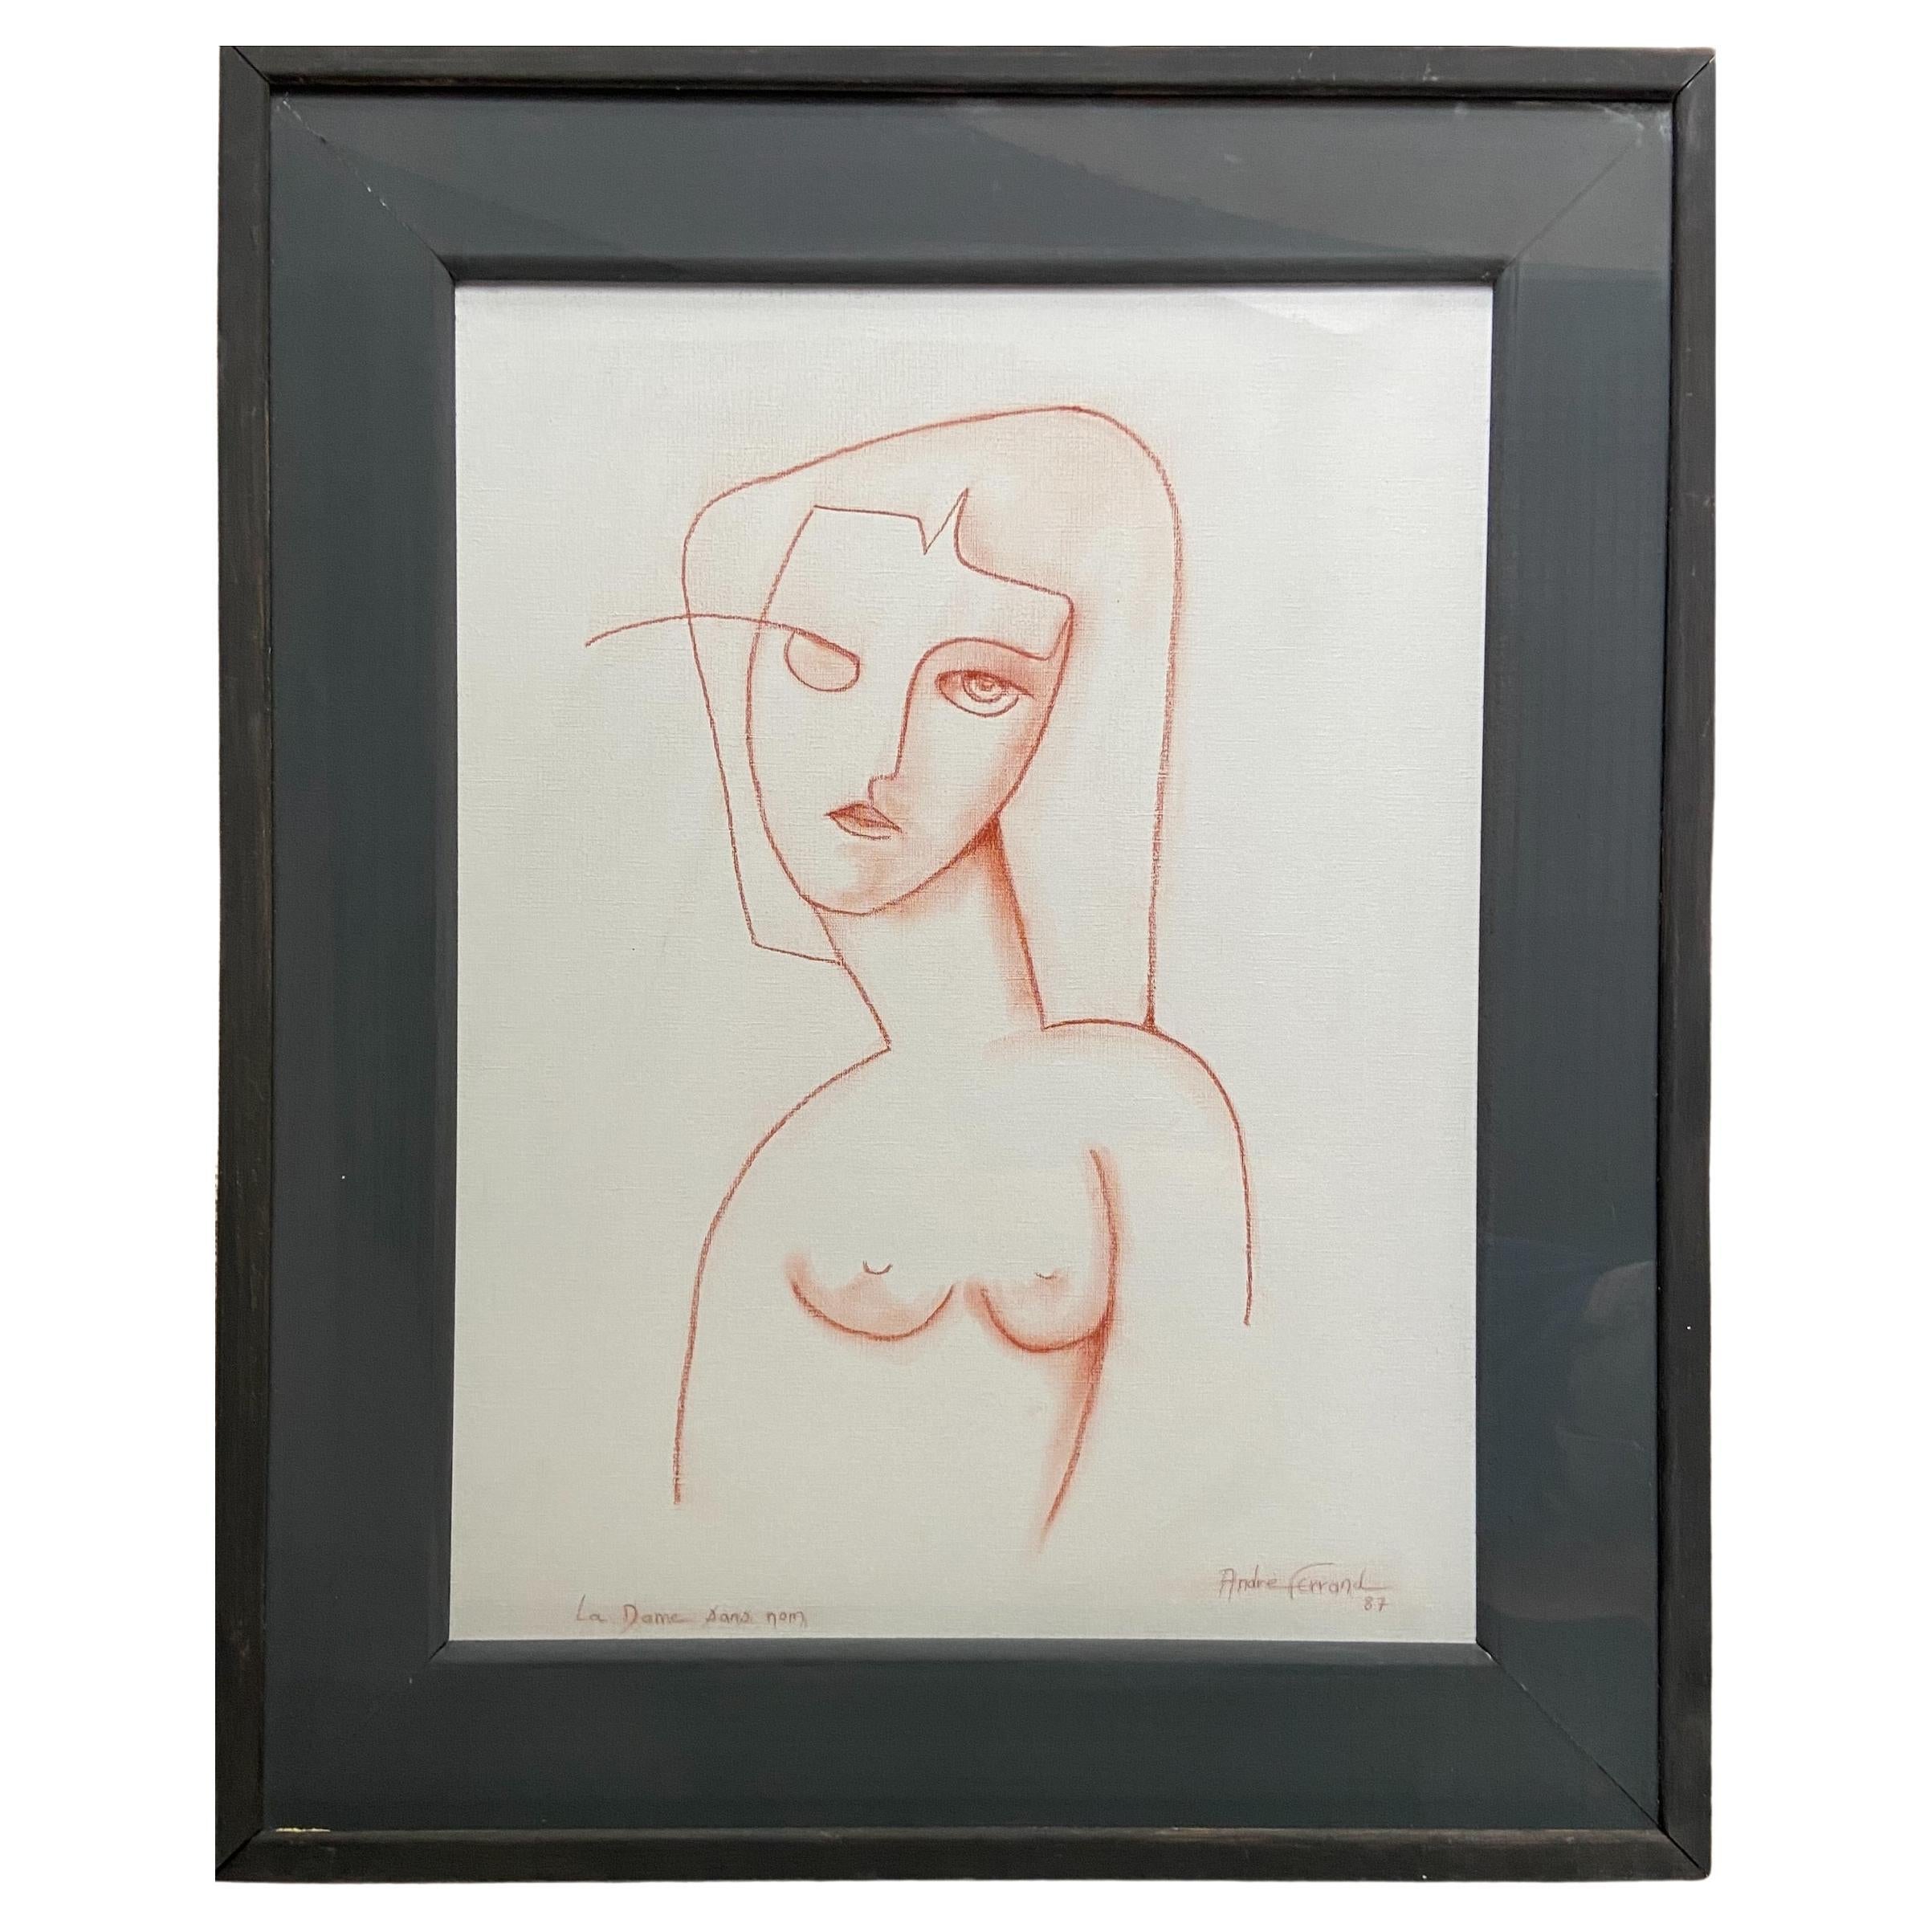 Lady with No Name. André Ferrand, 1987 For Sale